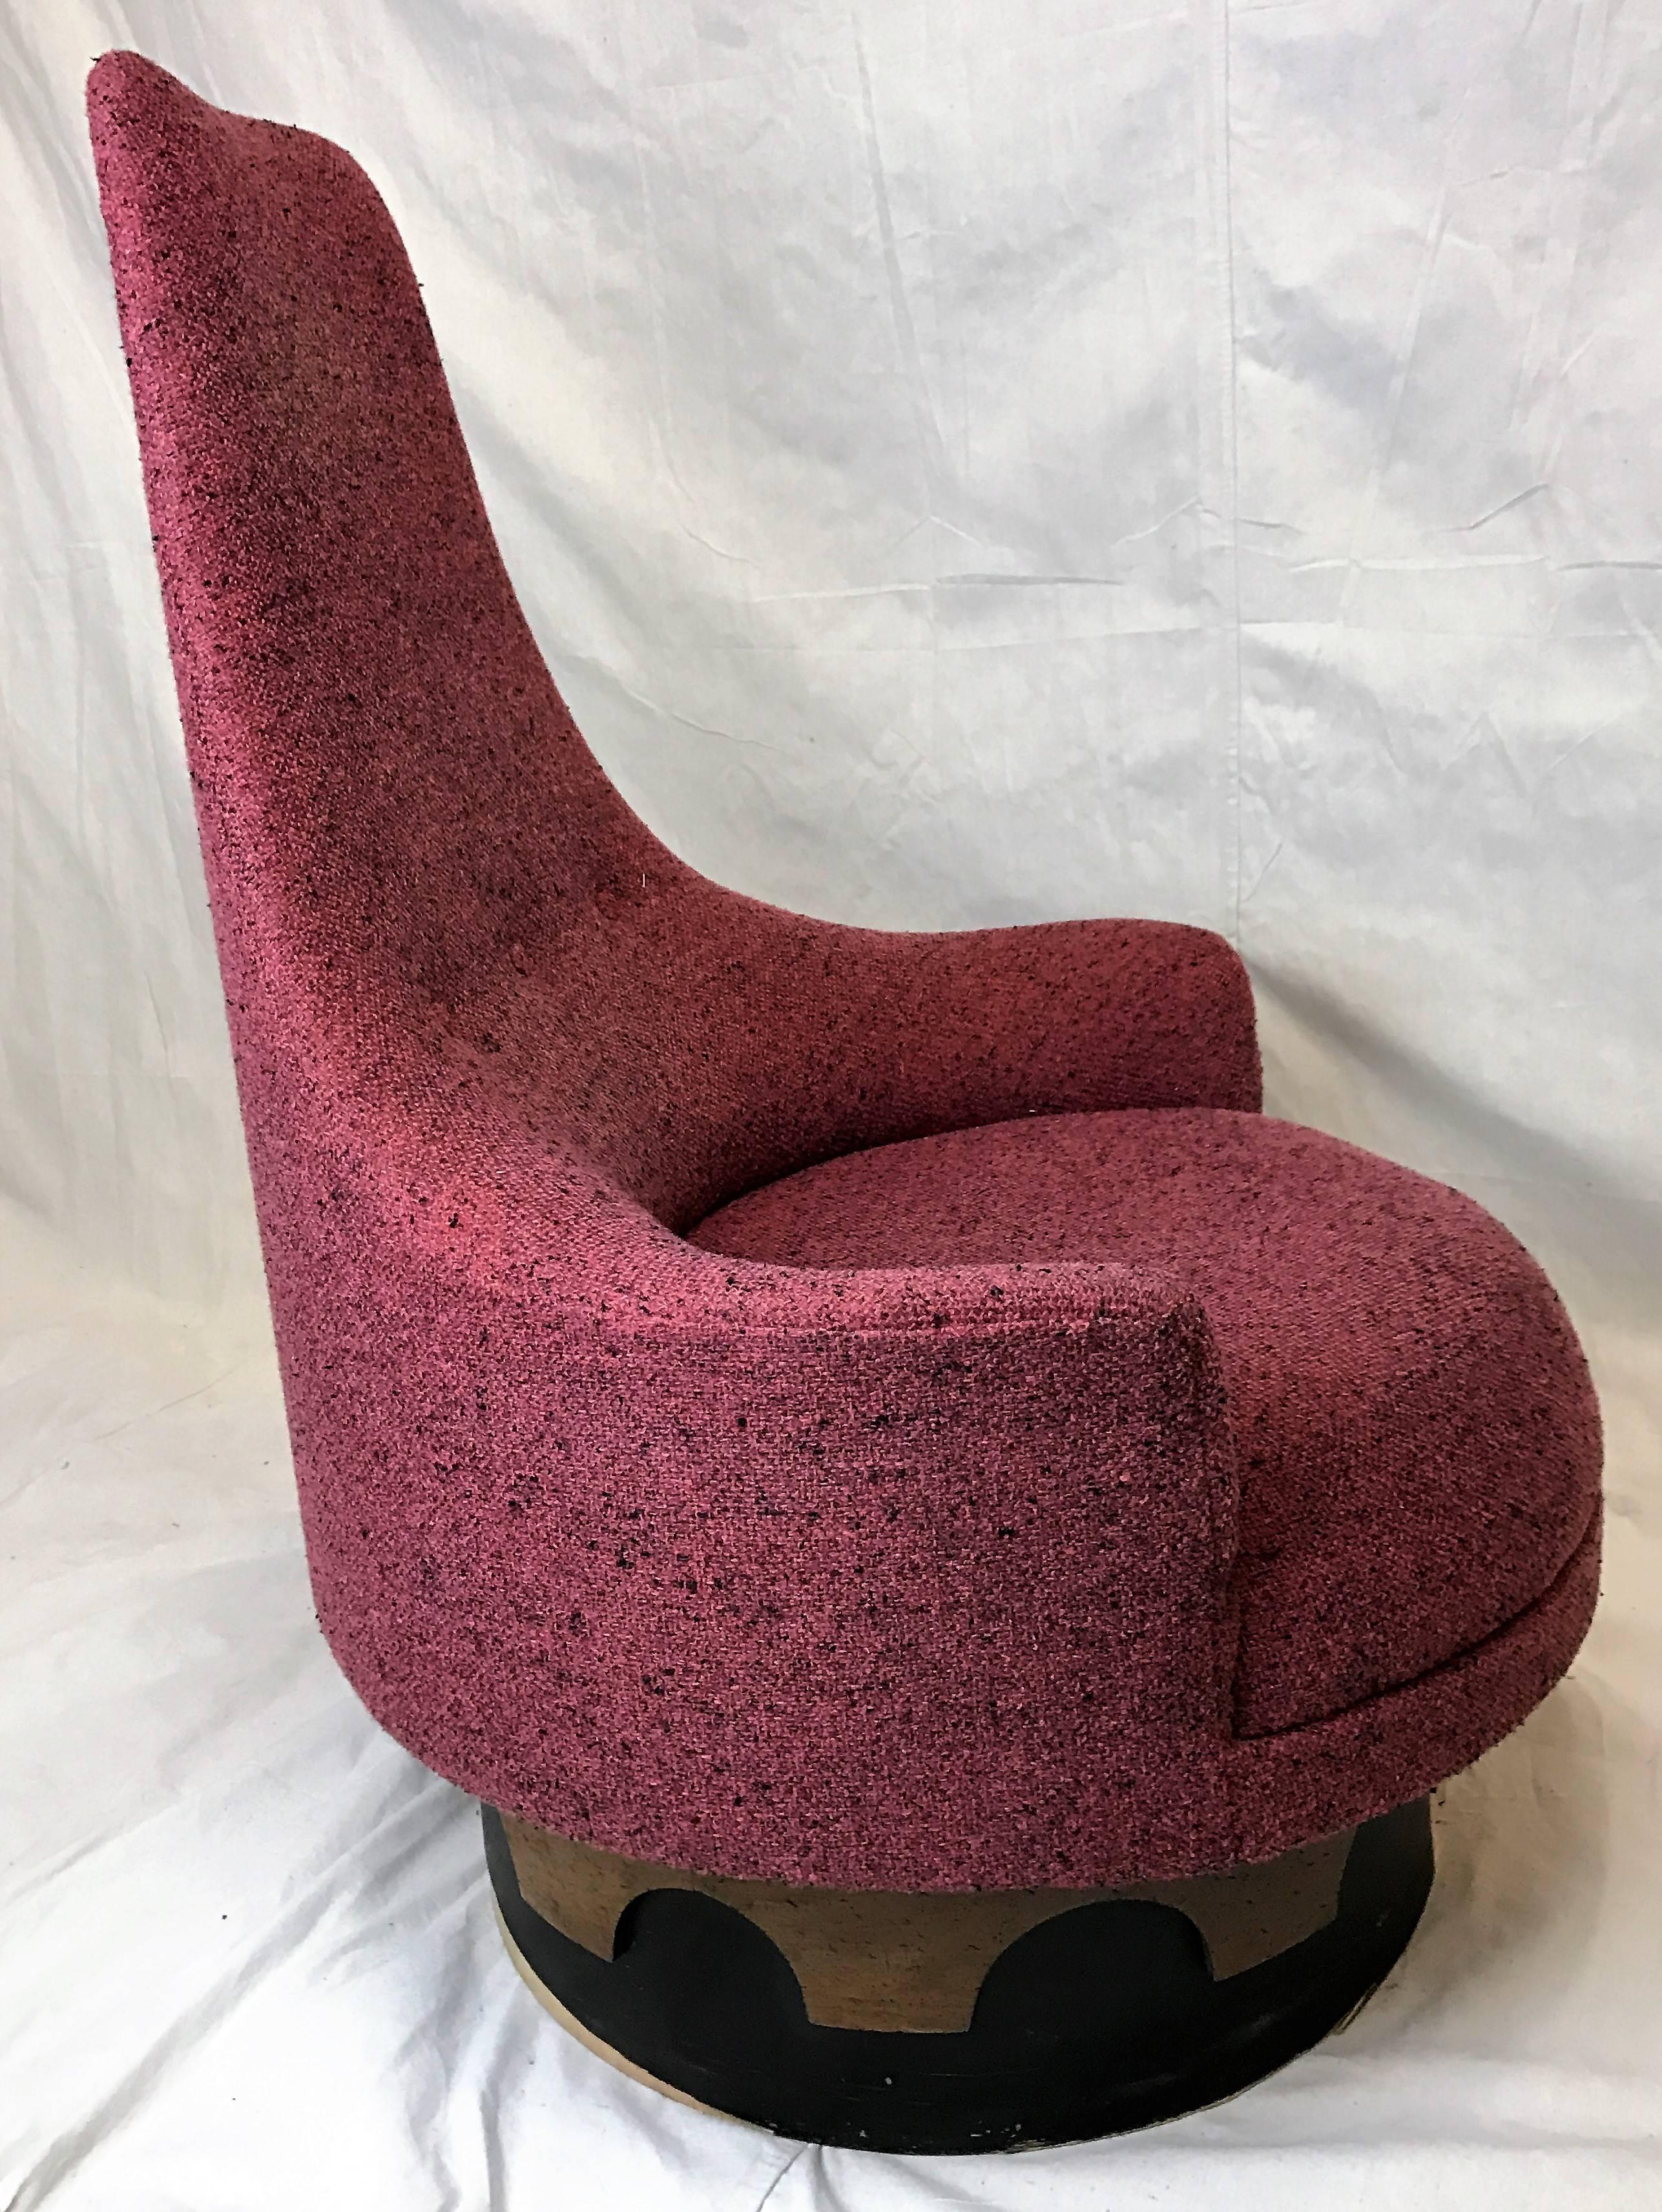 High-back swivel lounge chair by Adrian Pearsall for his “Strictly Spanish” collection for Craft Associates. Original fuchsia tweed upholstery and plinth base featuring two-toned design rotates 360 degrees.